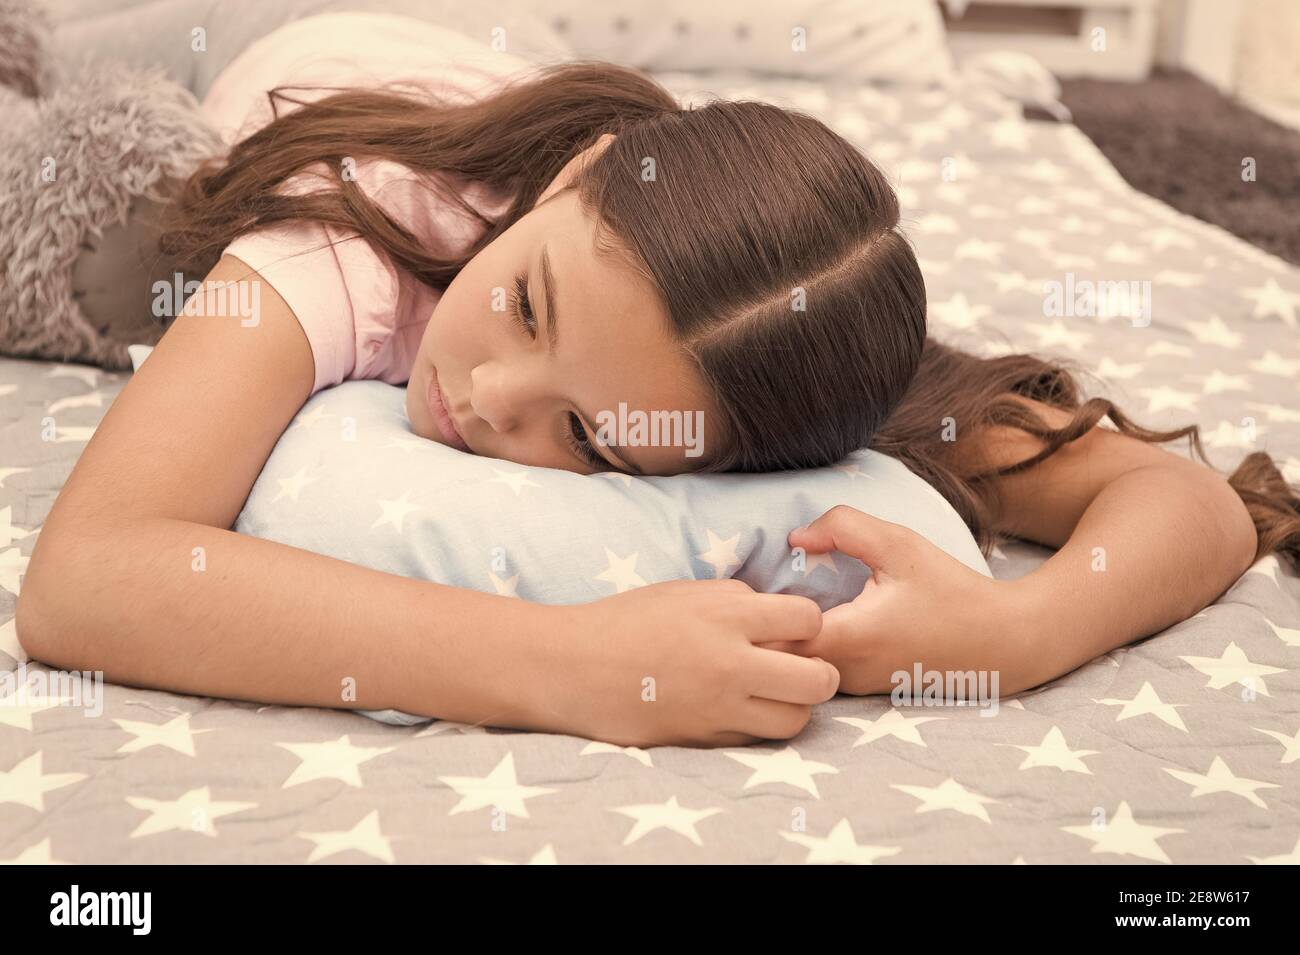 Sleepy beauty. Sleepy baby. Small girl relax in bed. Little child with sleepy look. Early morning or late evening. Bedtime routine. Nap time. She feels sleepy. Stock Photo